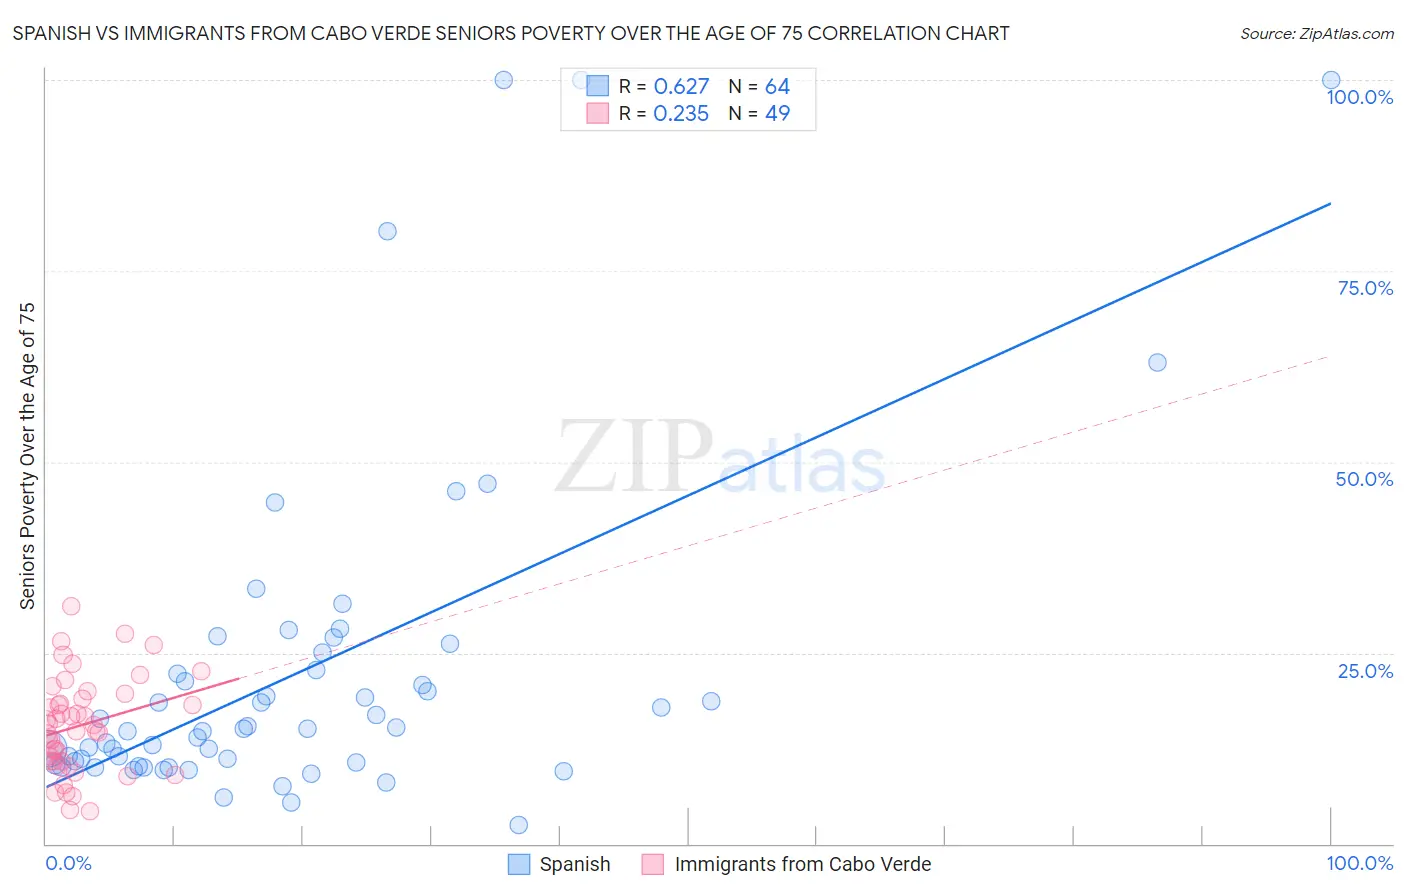 Spanish vs Immigrants from Cabo Verde Seniors Poverty Over the Age of 75